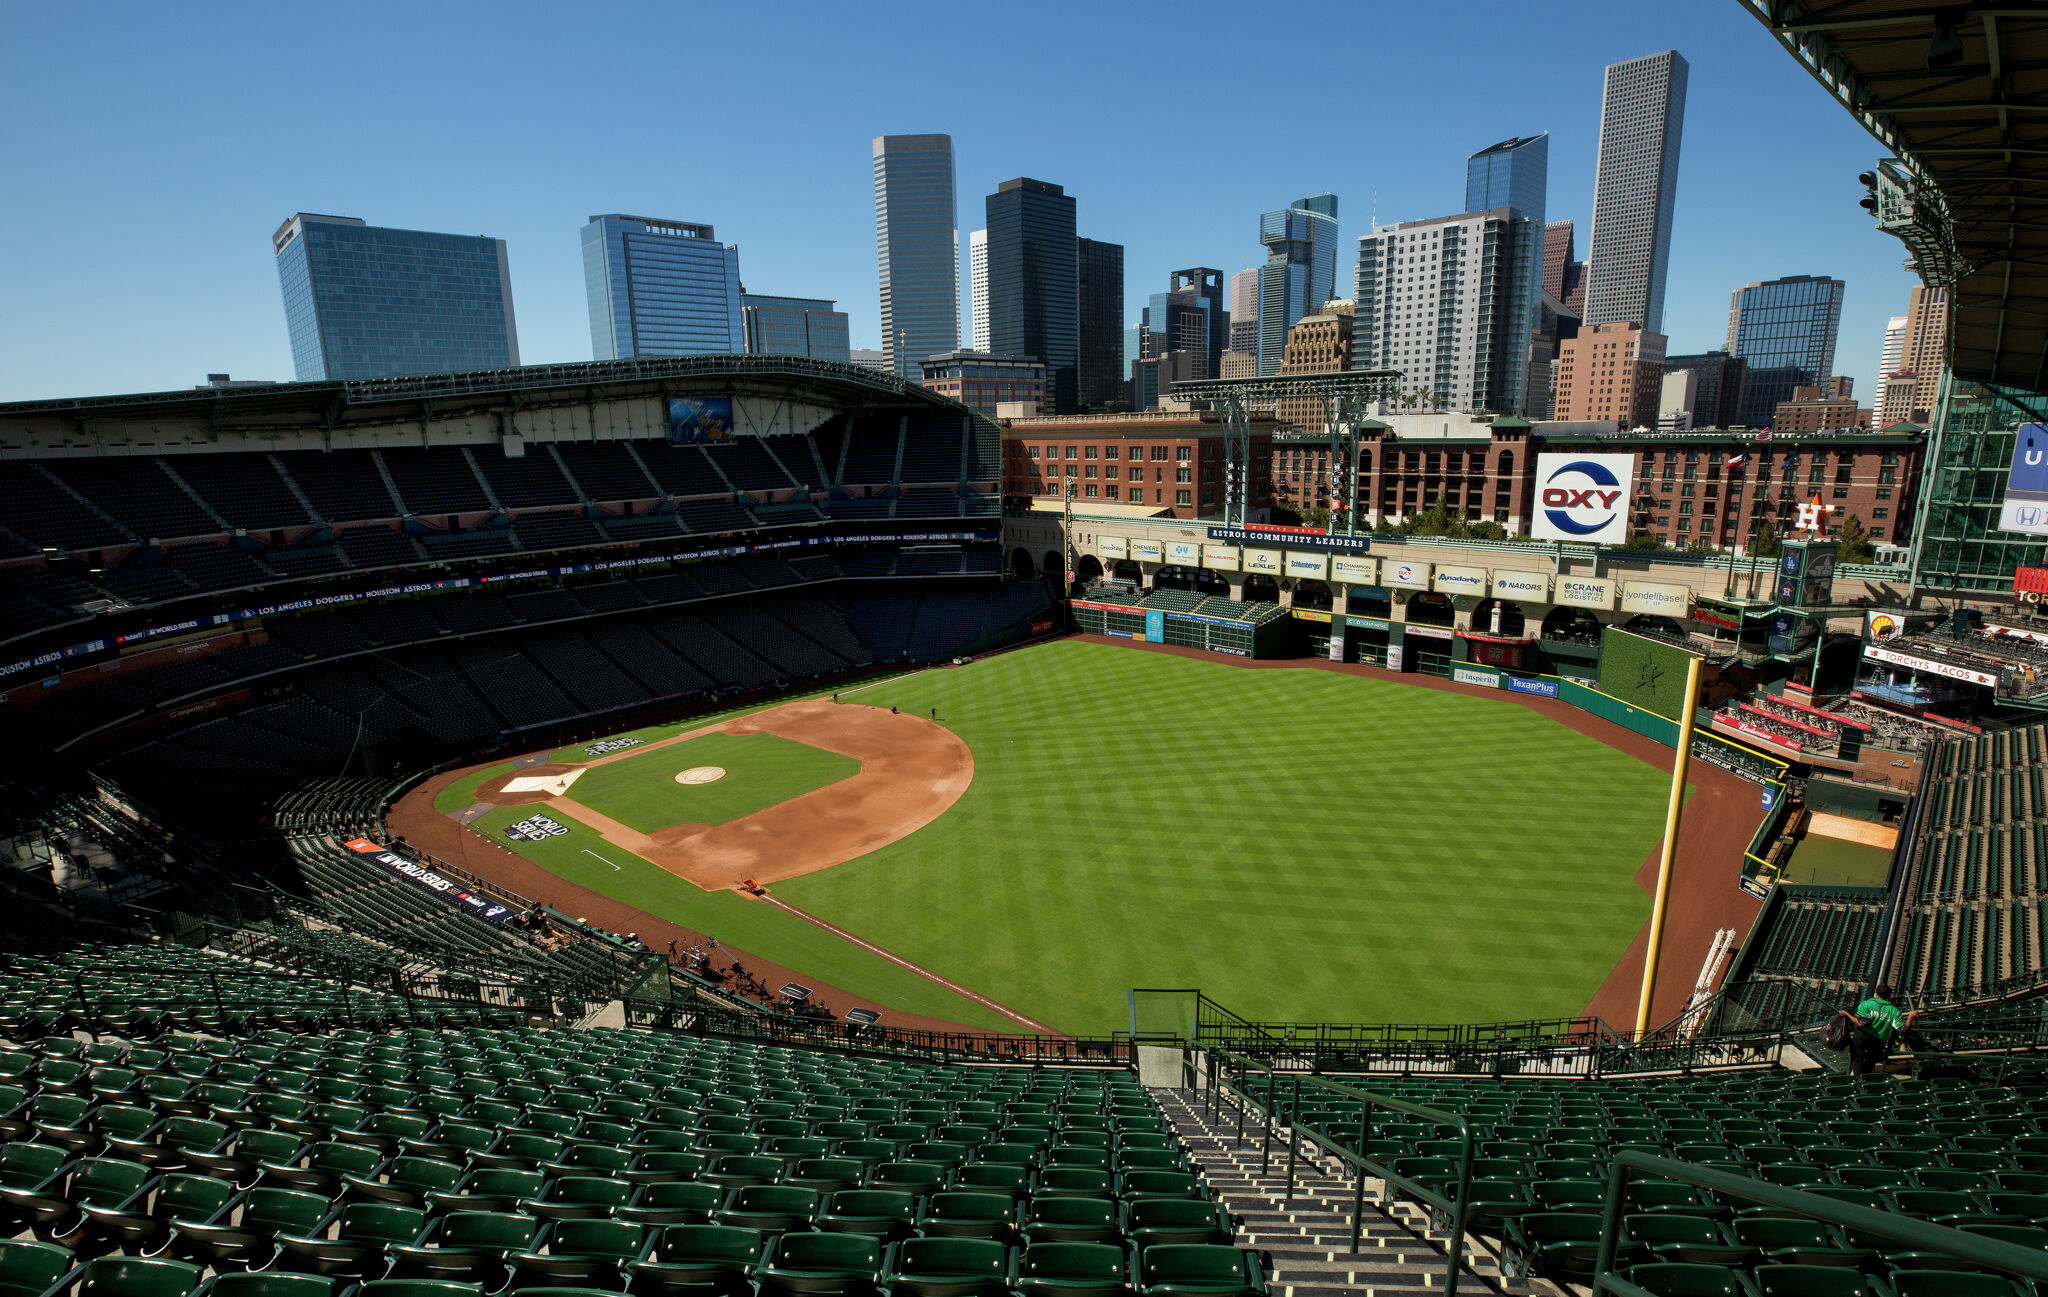 World Series 2017: Minute Maid Park's roof will be closed for Game